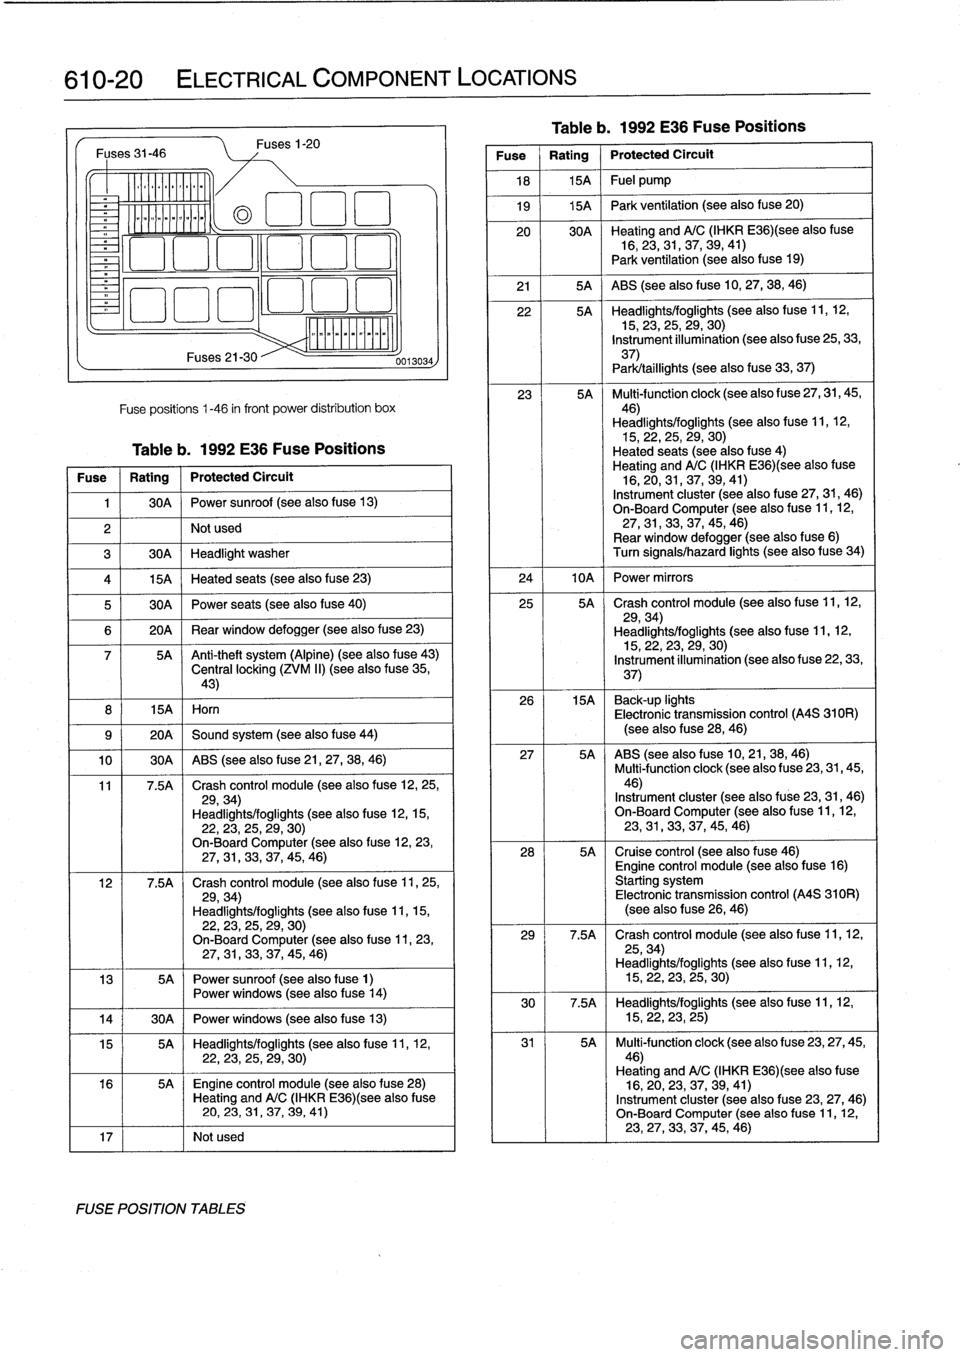 BMW 328i 1998 E36 Workshop Manual 
610-20

	

ELECTRICAL
COMPONENT
LOCATIONS

Fuses
31-46

o_

~oomoo
ommmo~

8
I

	

15A
I
Horn
Fuses21-30

Fuses
1-20

Fuse
positions
1-46
in
front
power
distribution
box

Table
b
.
1992
E36
Fuse
Posi